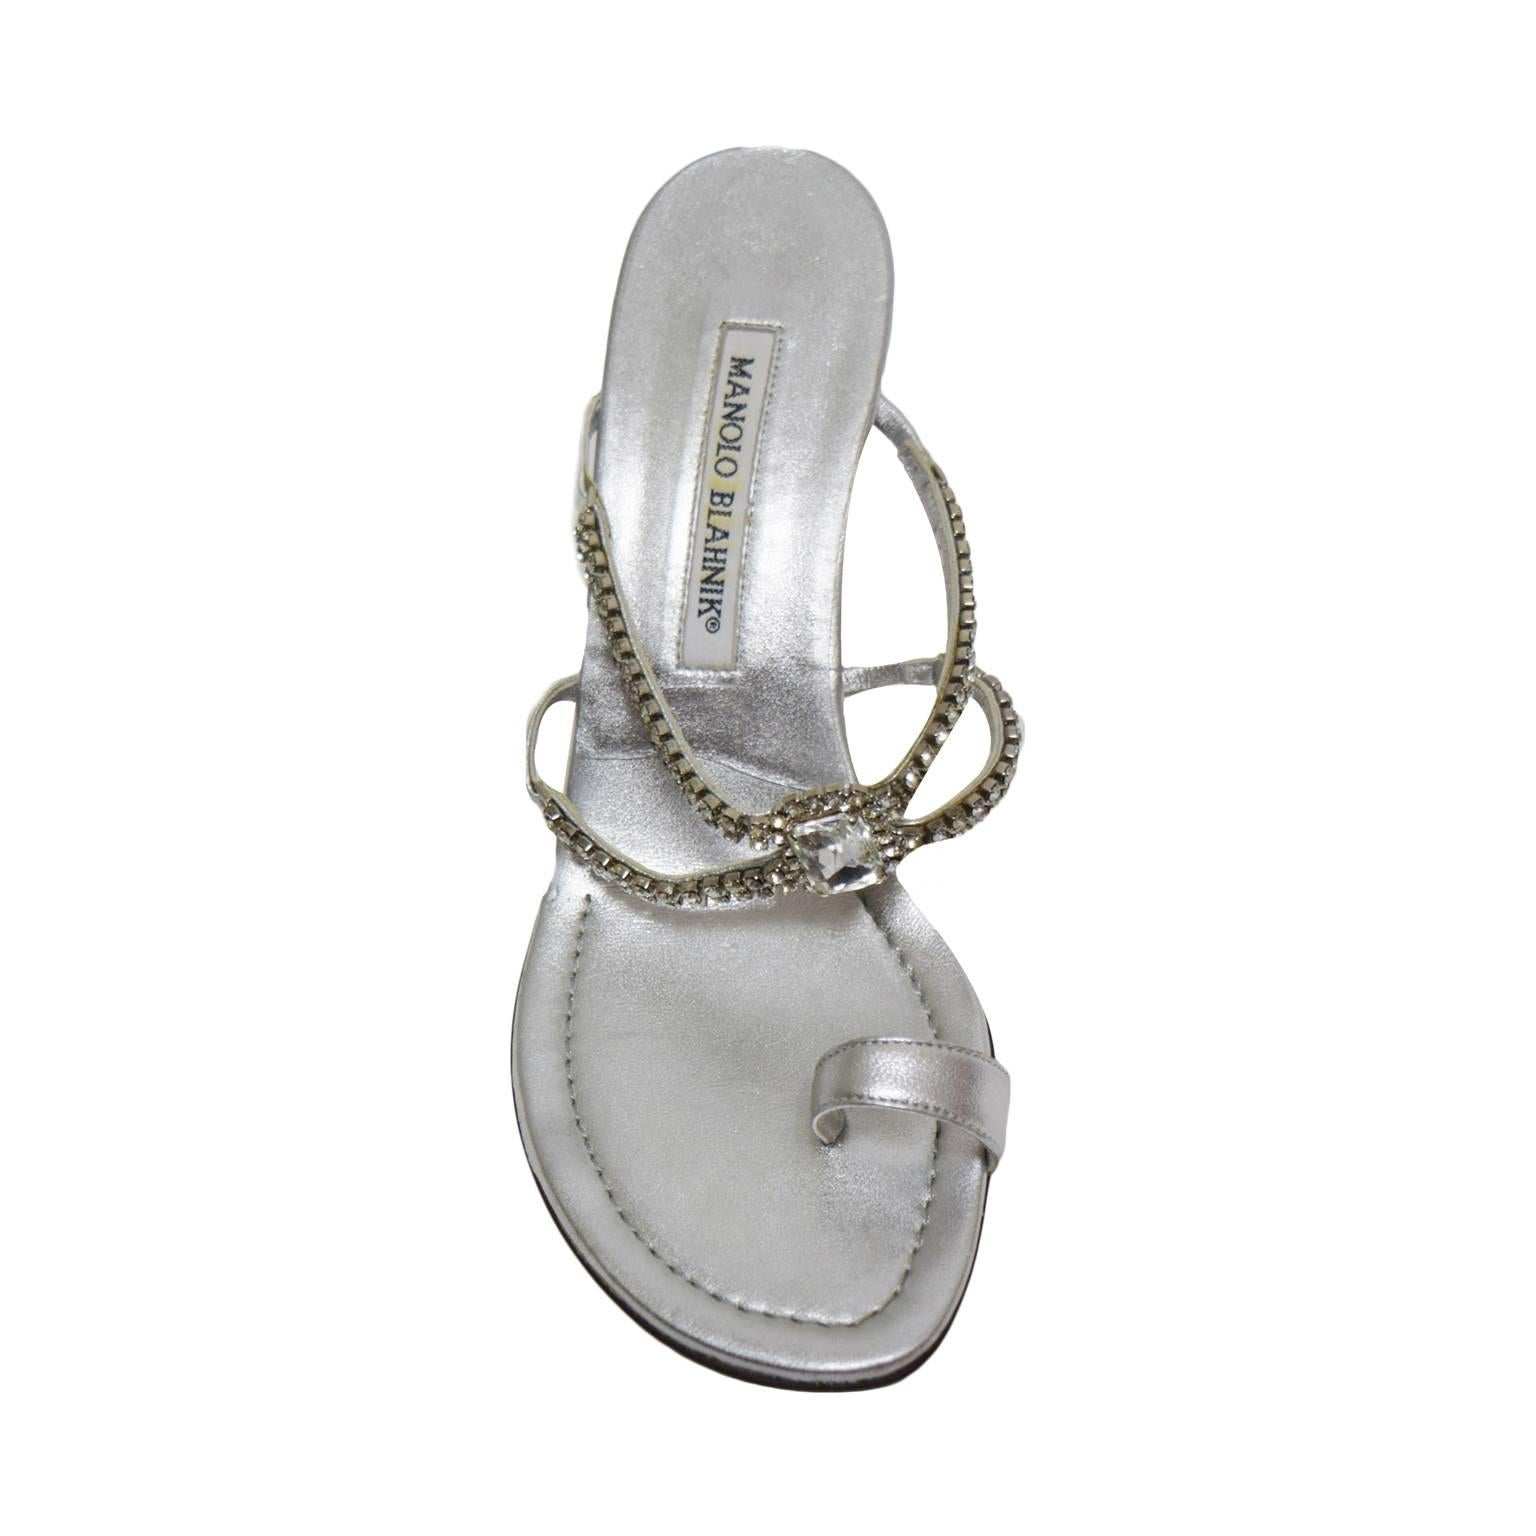 This elegant Manolo Blahnik sandals are perfect for any special occasions. The sole is made of metallic leather and the straps are lined in leather and are embellished with Swarovski Crystals and a square cut pendent. There is a toe loop for